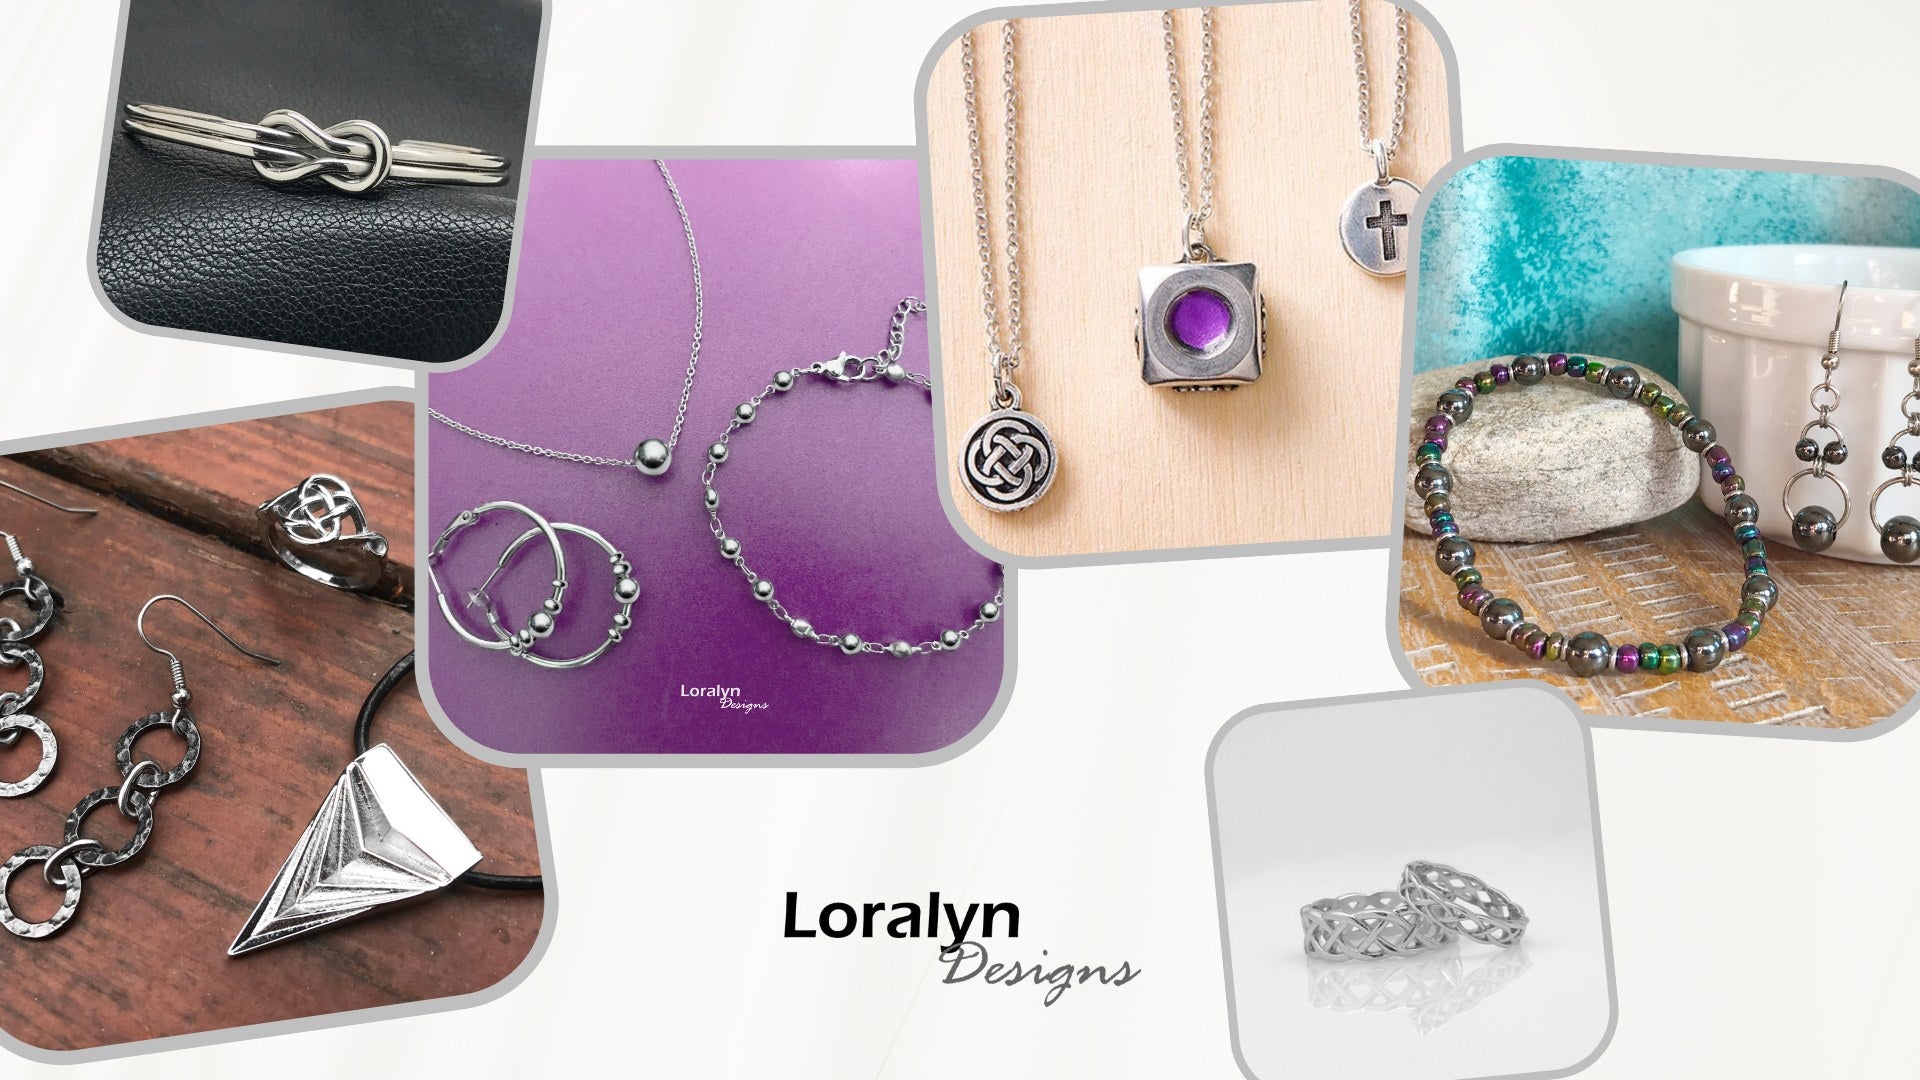 Load video: About Loralyn Designs Jewelry Business